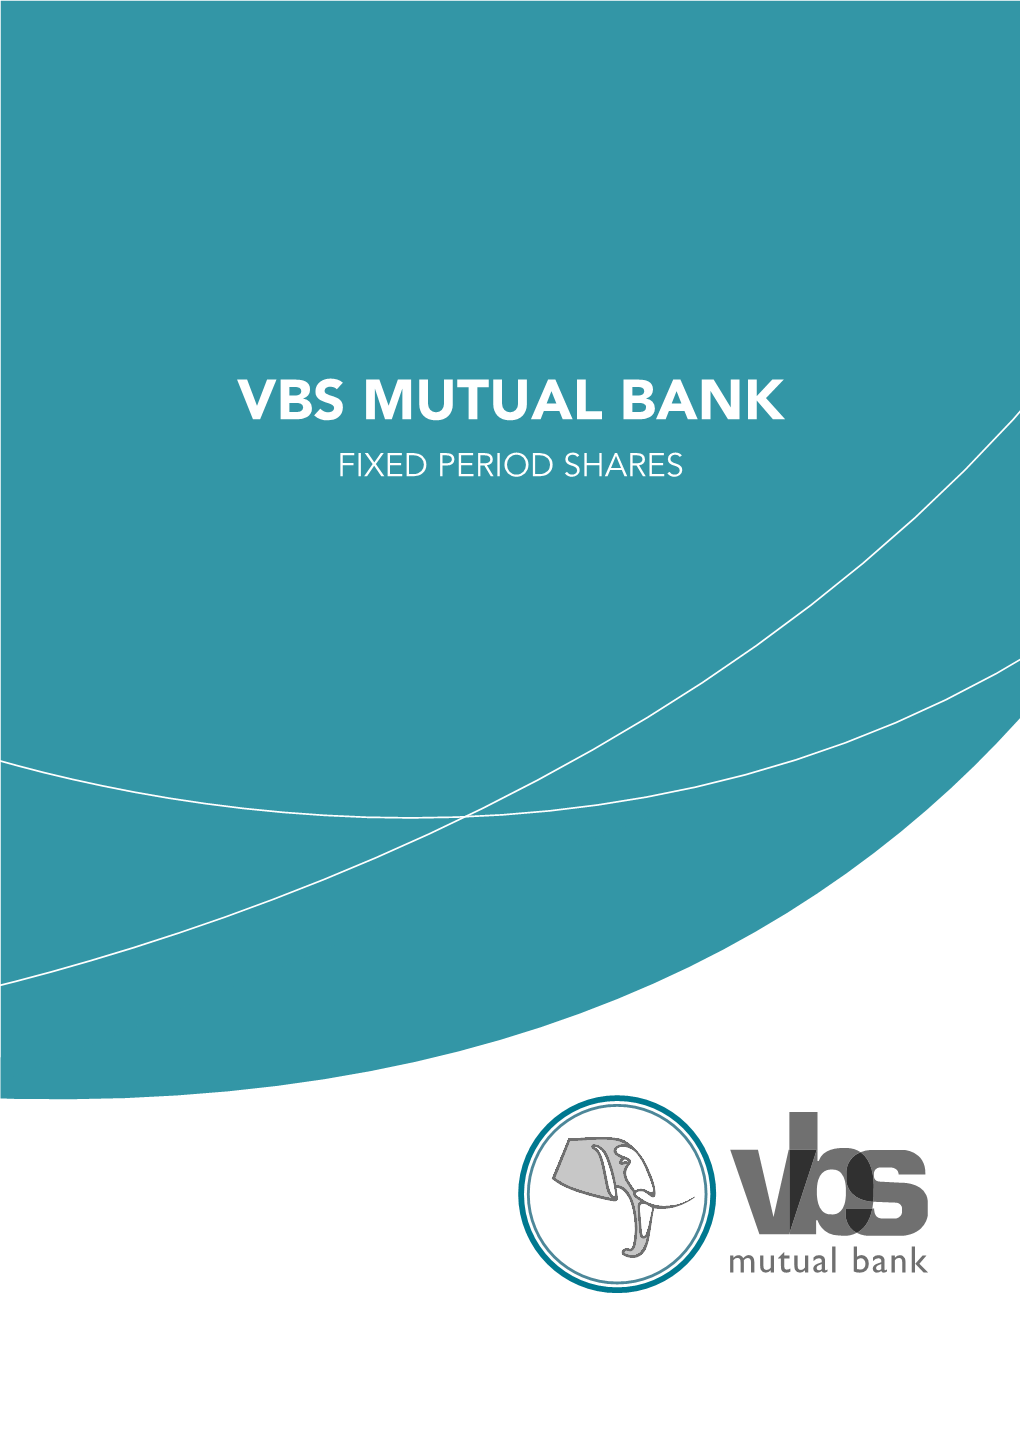 VBS MUTUAL BANK FIXED PERIOD SHARES VBS Mutual Bank’S Board of Directors Approved the Issuance of Fixed Period Shares to the General Public